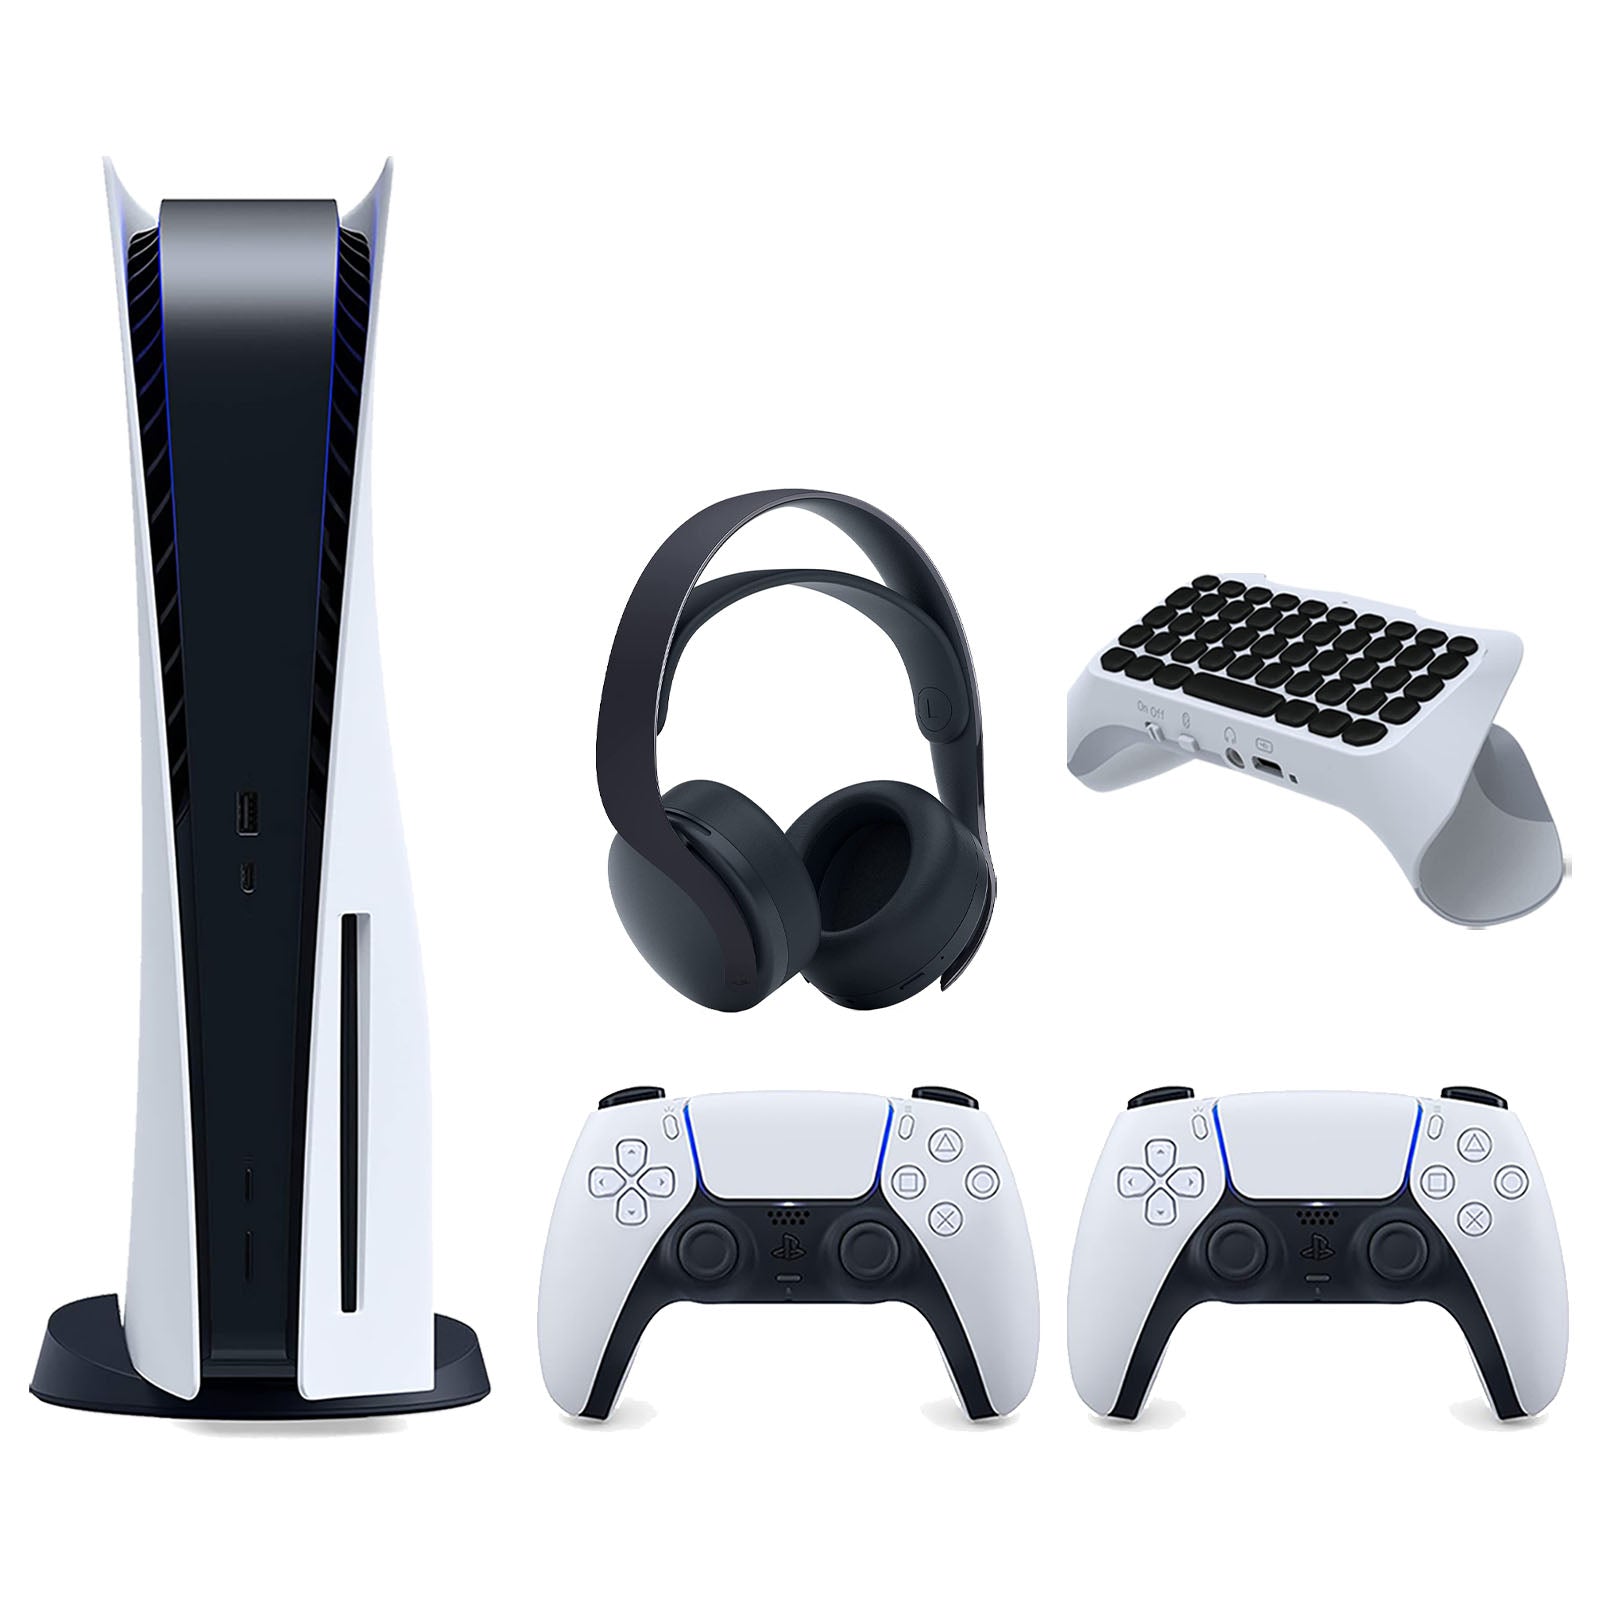 Sony Playstation 5 Disc Version Console with Extra White Controller, Black PULSE 3D Headset and Surge QuickType 2.0 Wireless PS5 Controller Keypad Bundle - Pro-Distributing